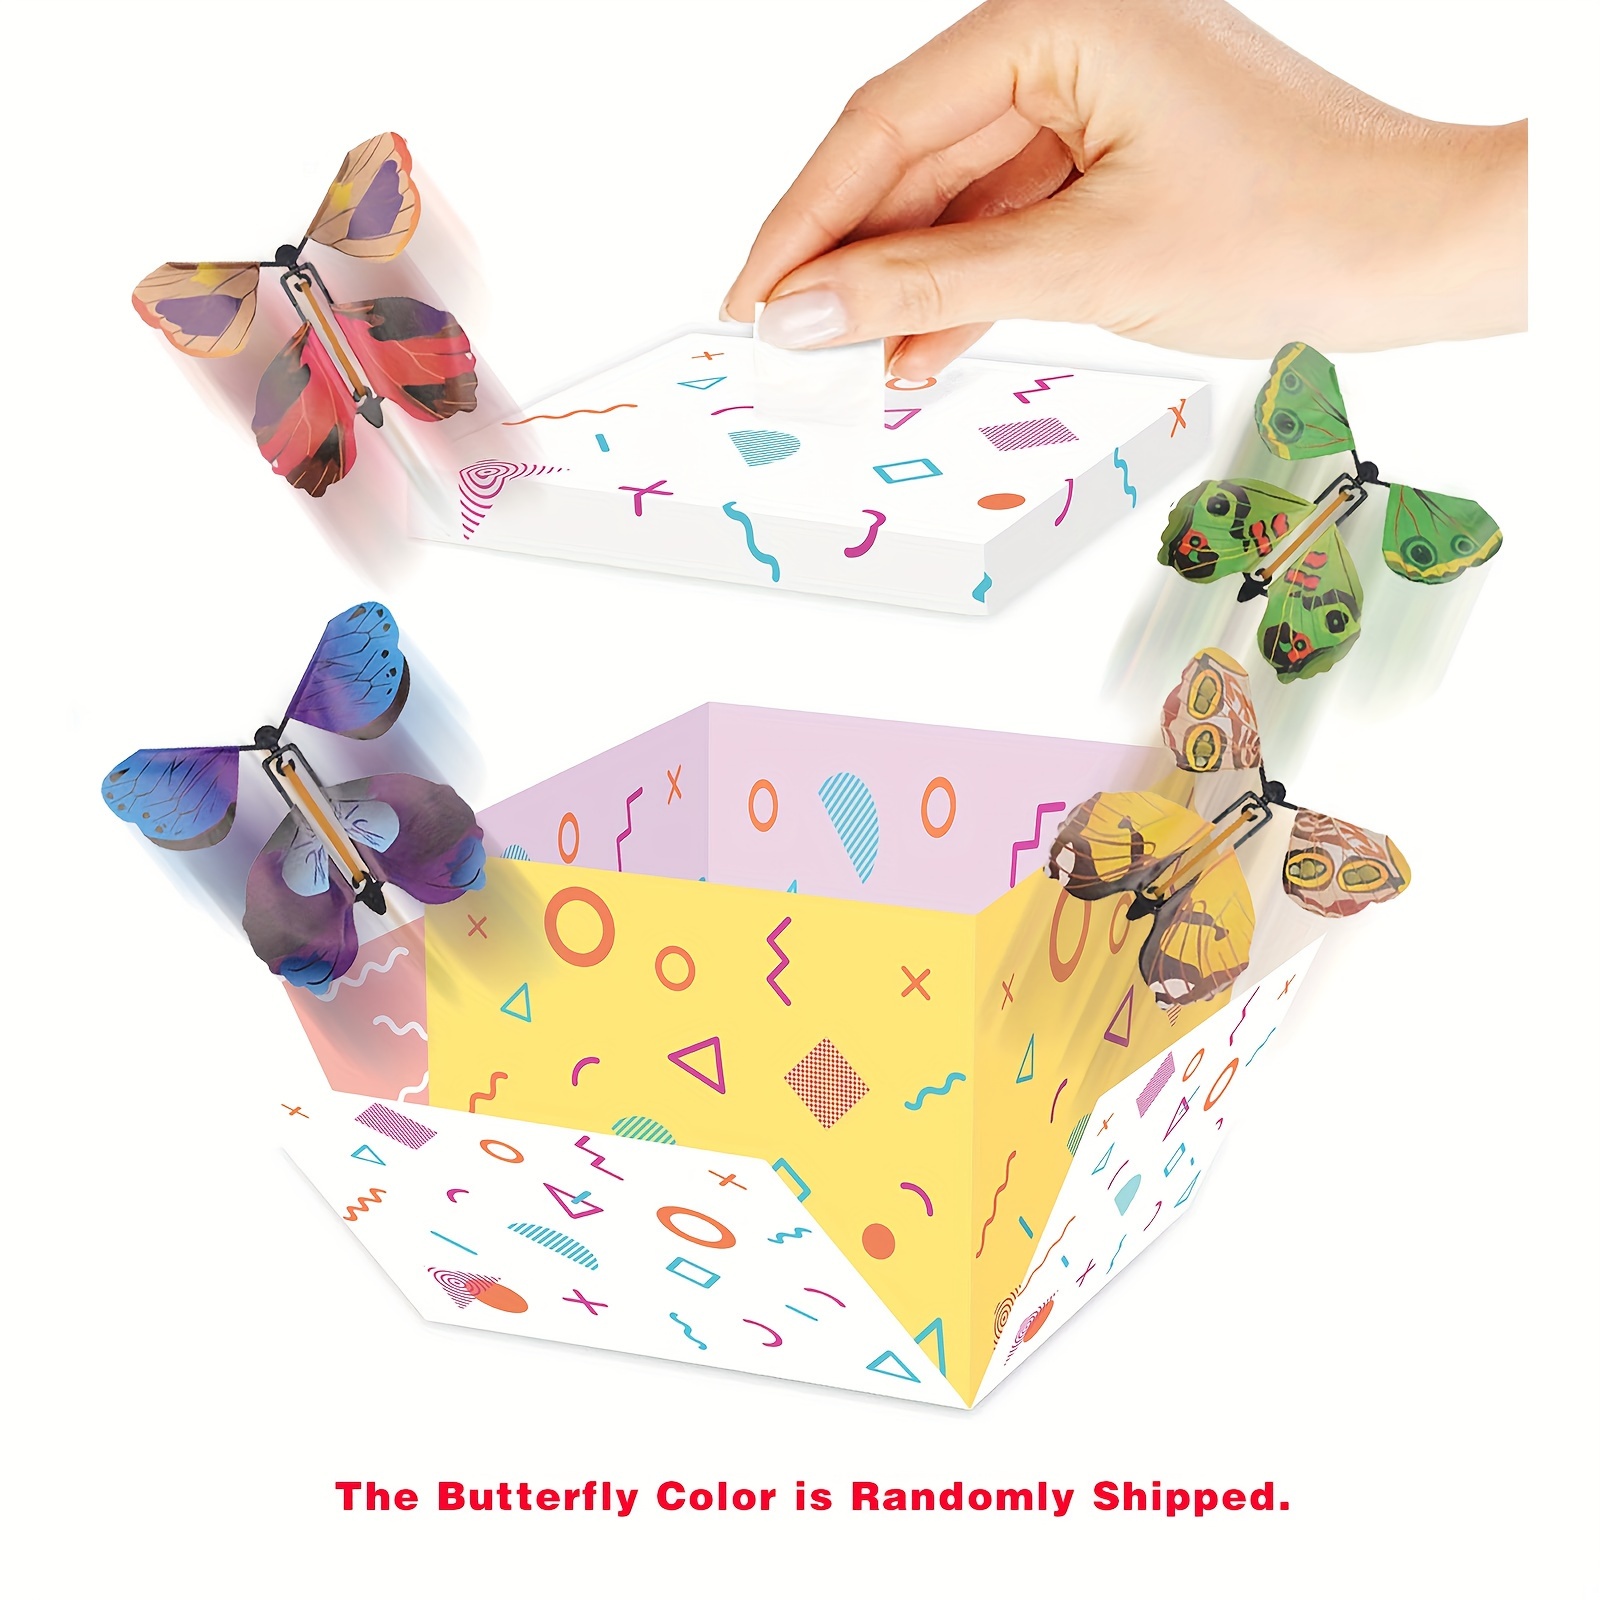 Fill a box with paper butterflies! This décor project is a fun take on the  butterfly trend